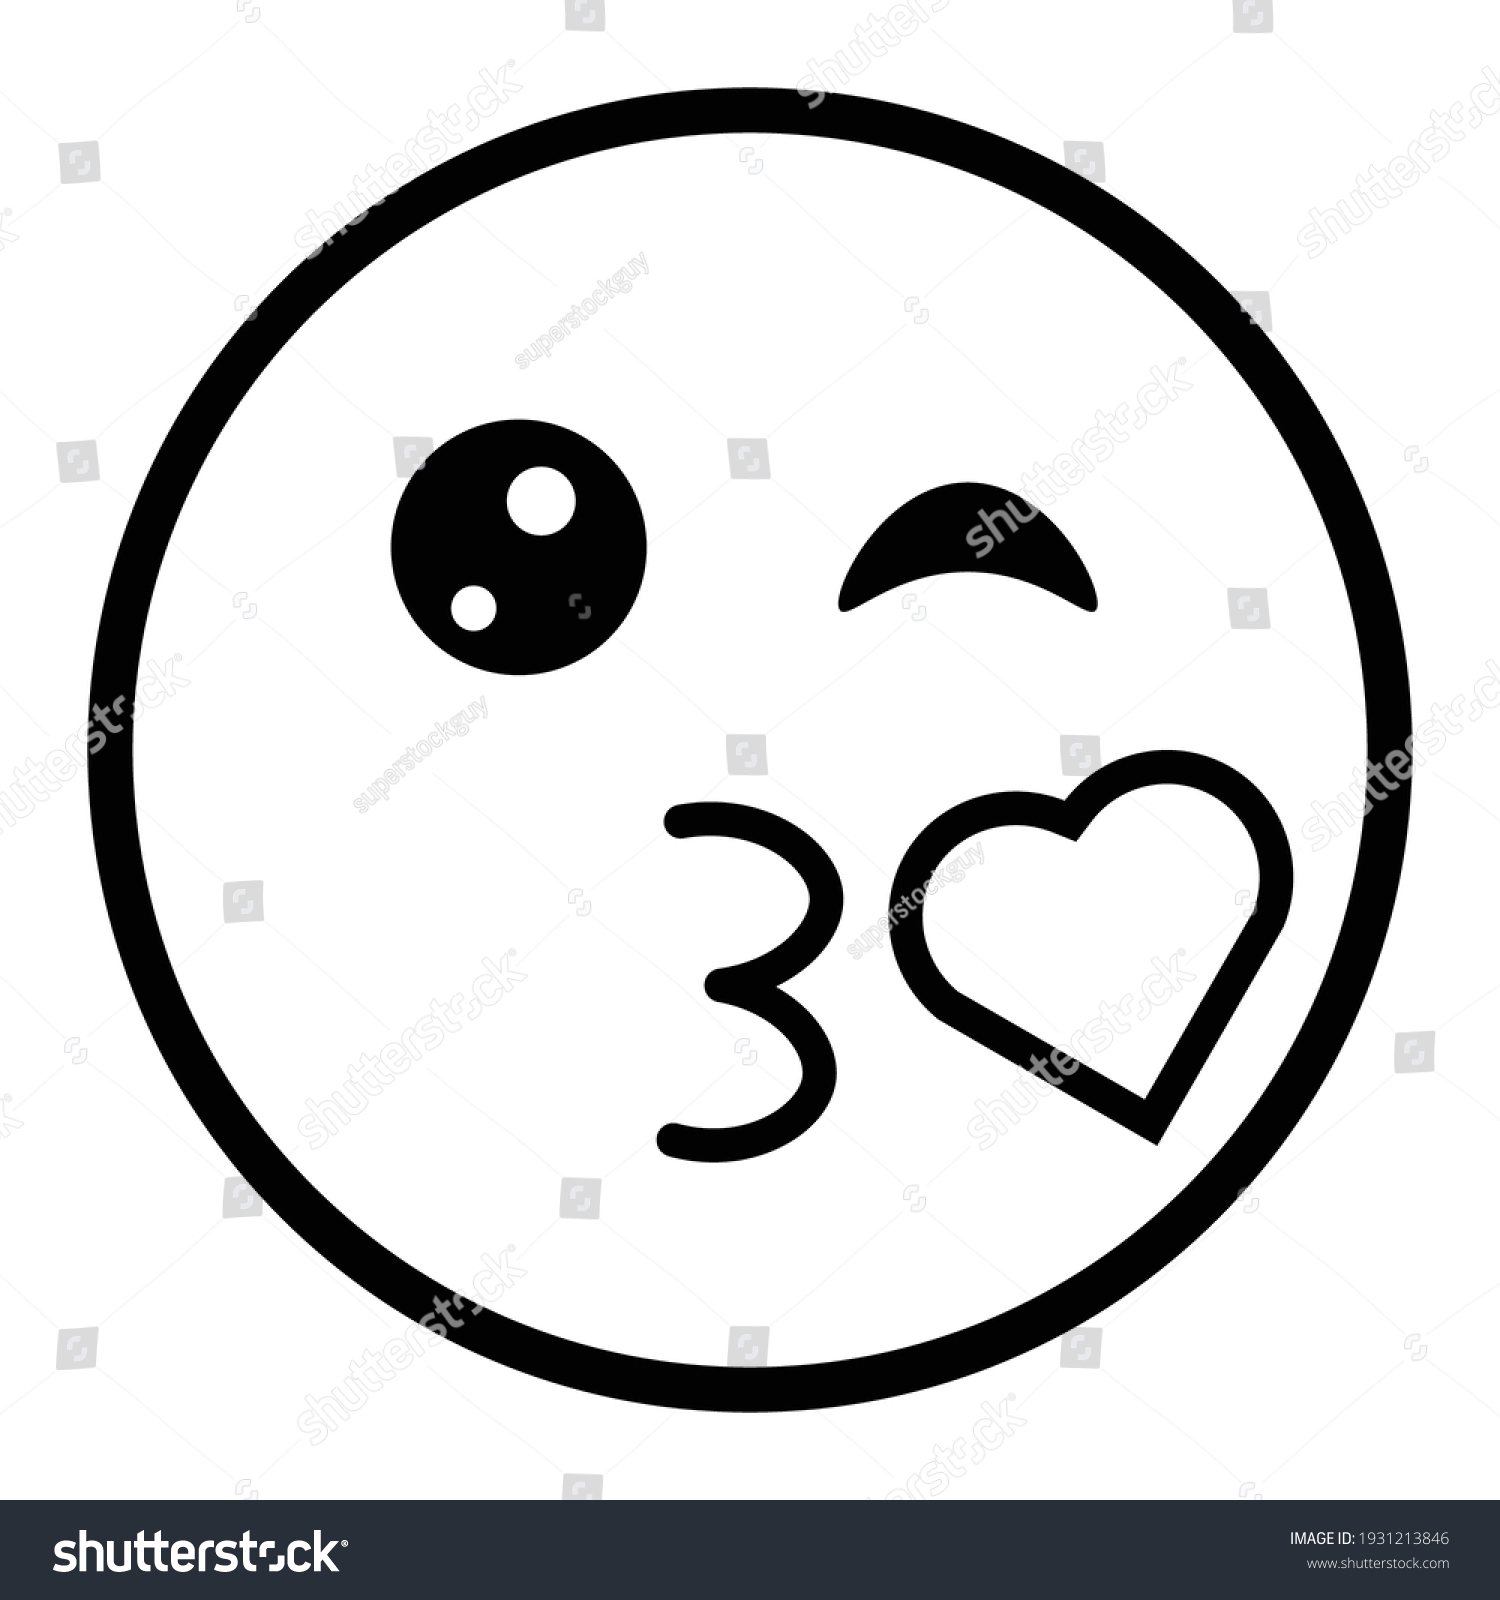 SVG of Cute thin line blowing kiss emoji face. Royalty free and fully editable. svg